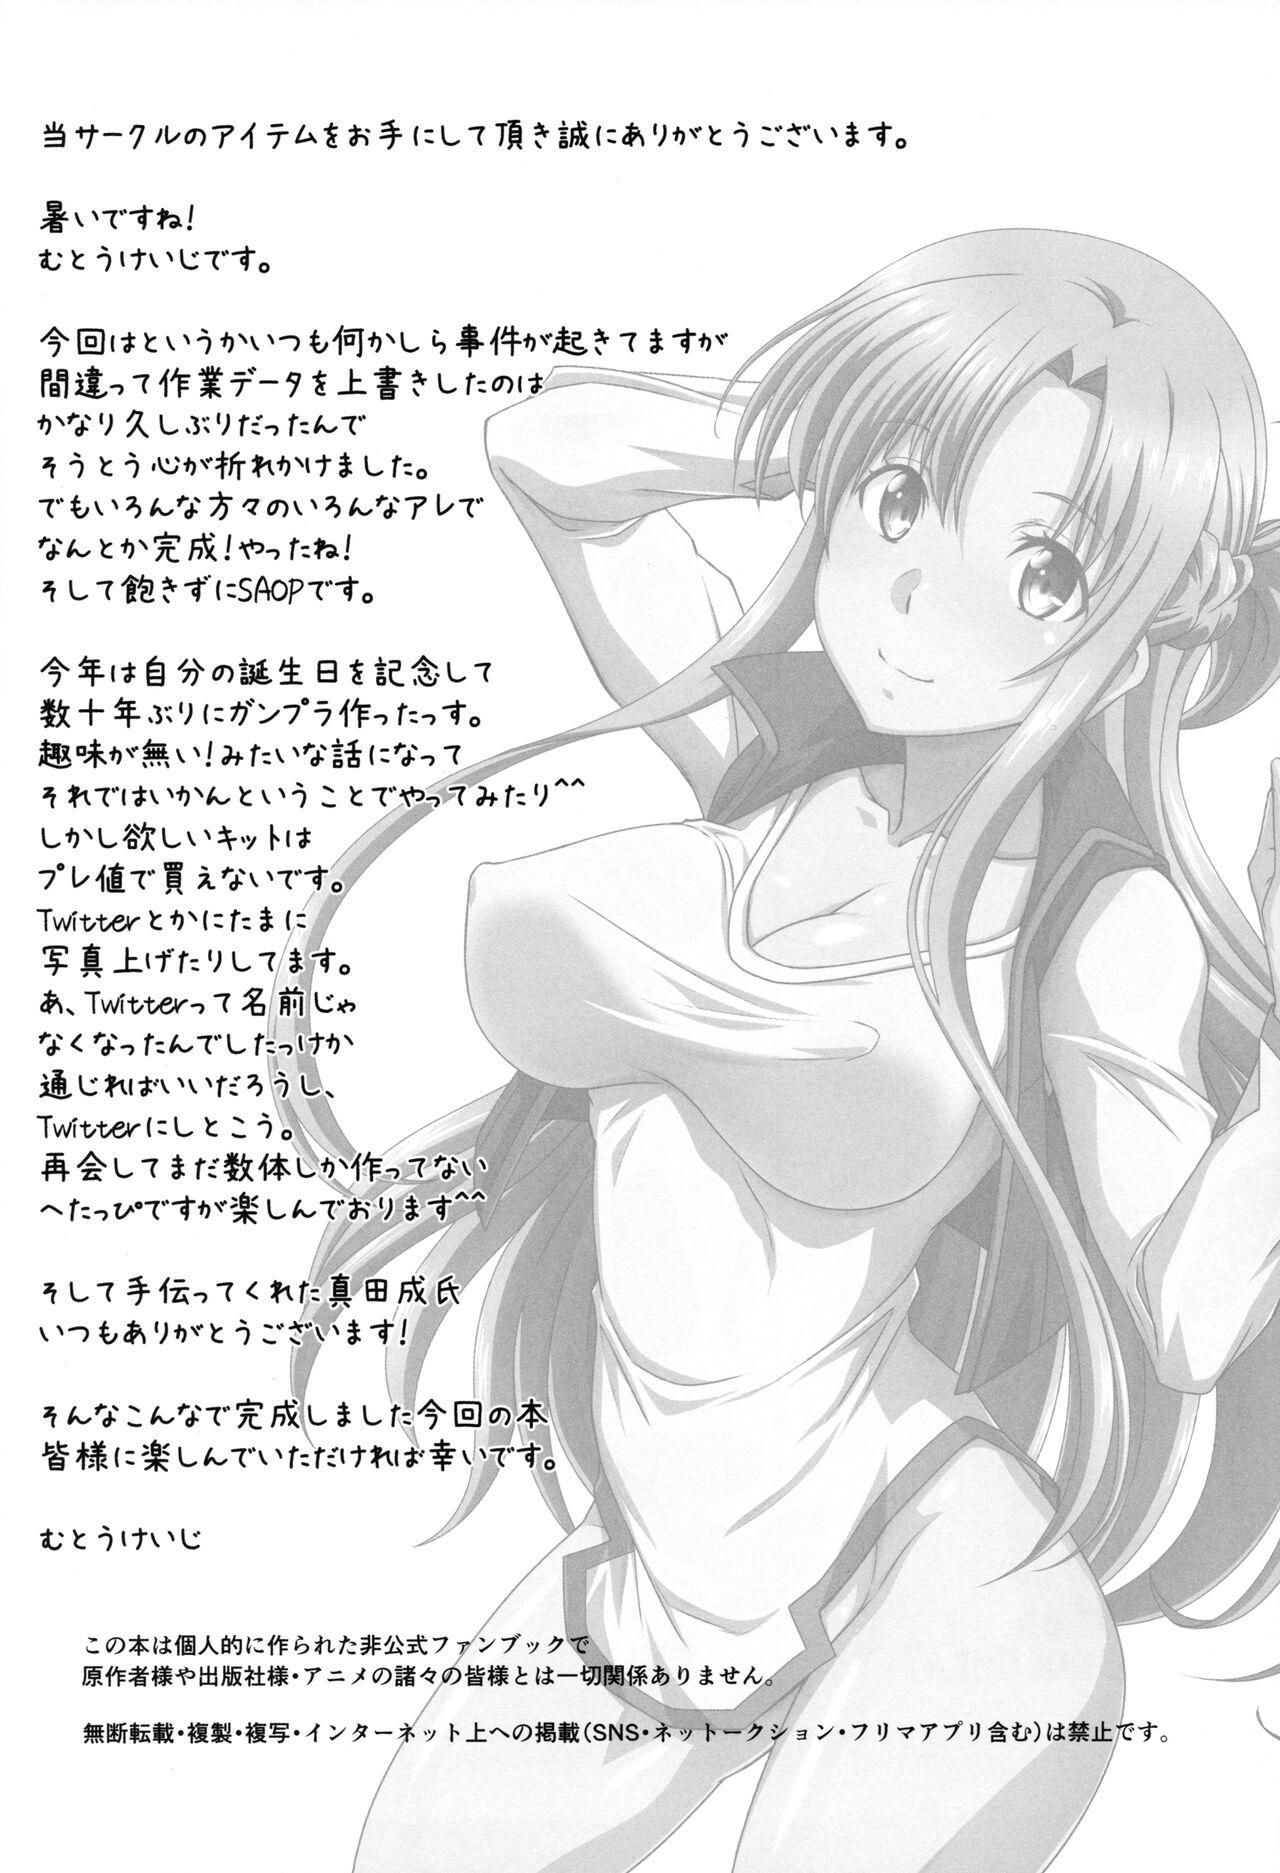 Safadinha Astral Bout Ver. 47 - Sword art online Groupfuck - Page 3